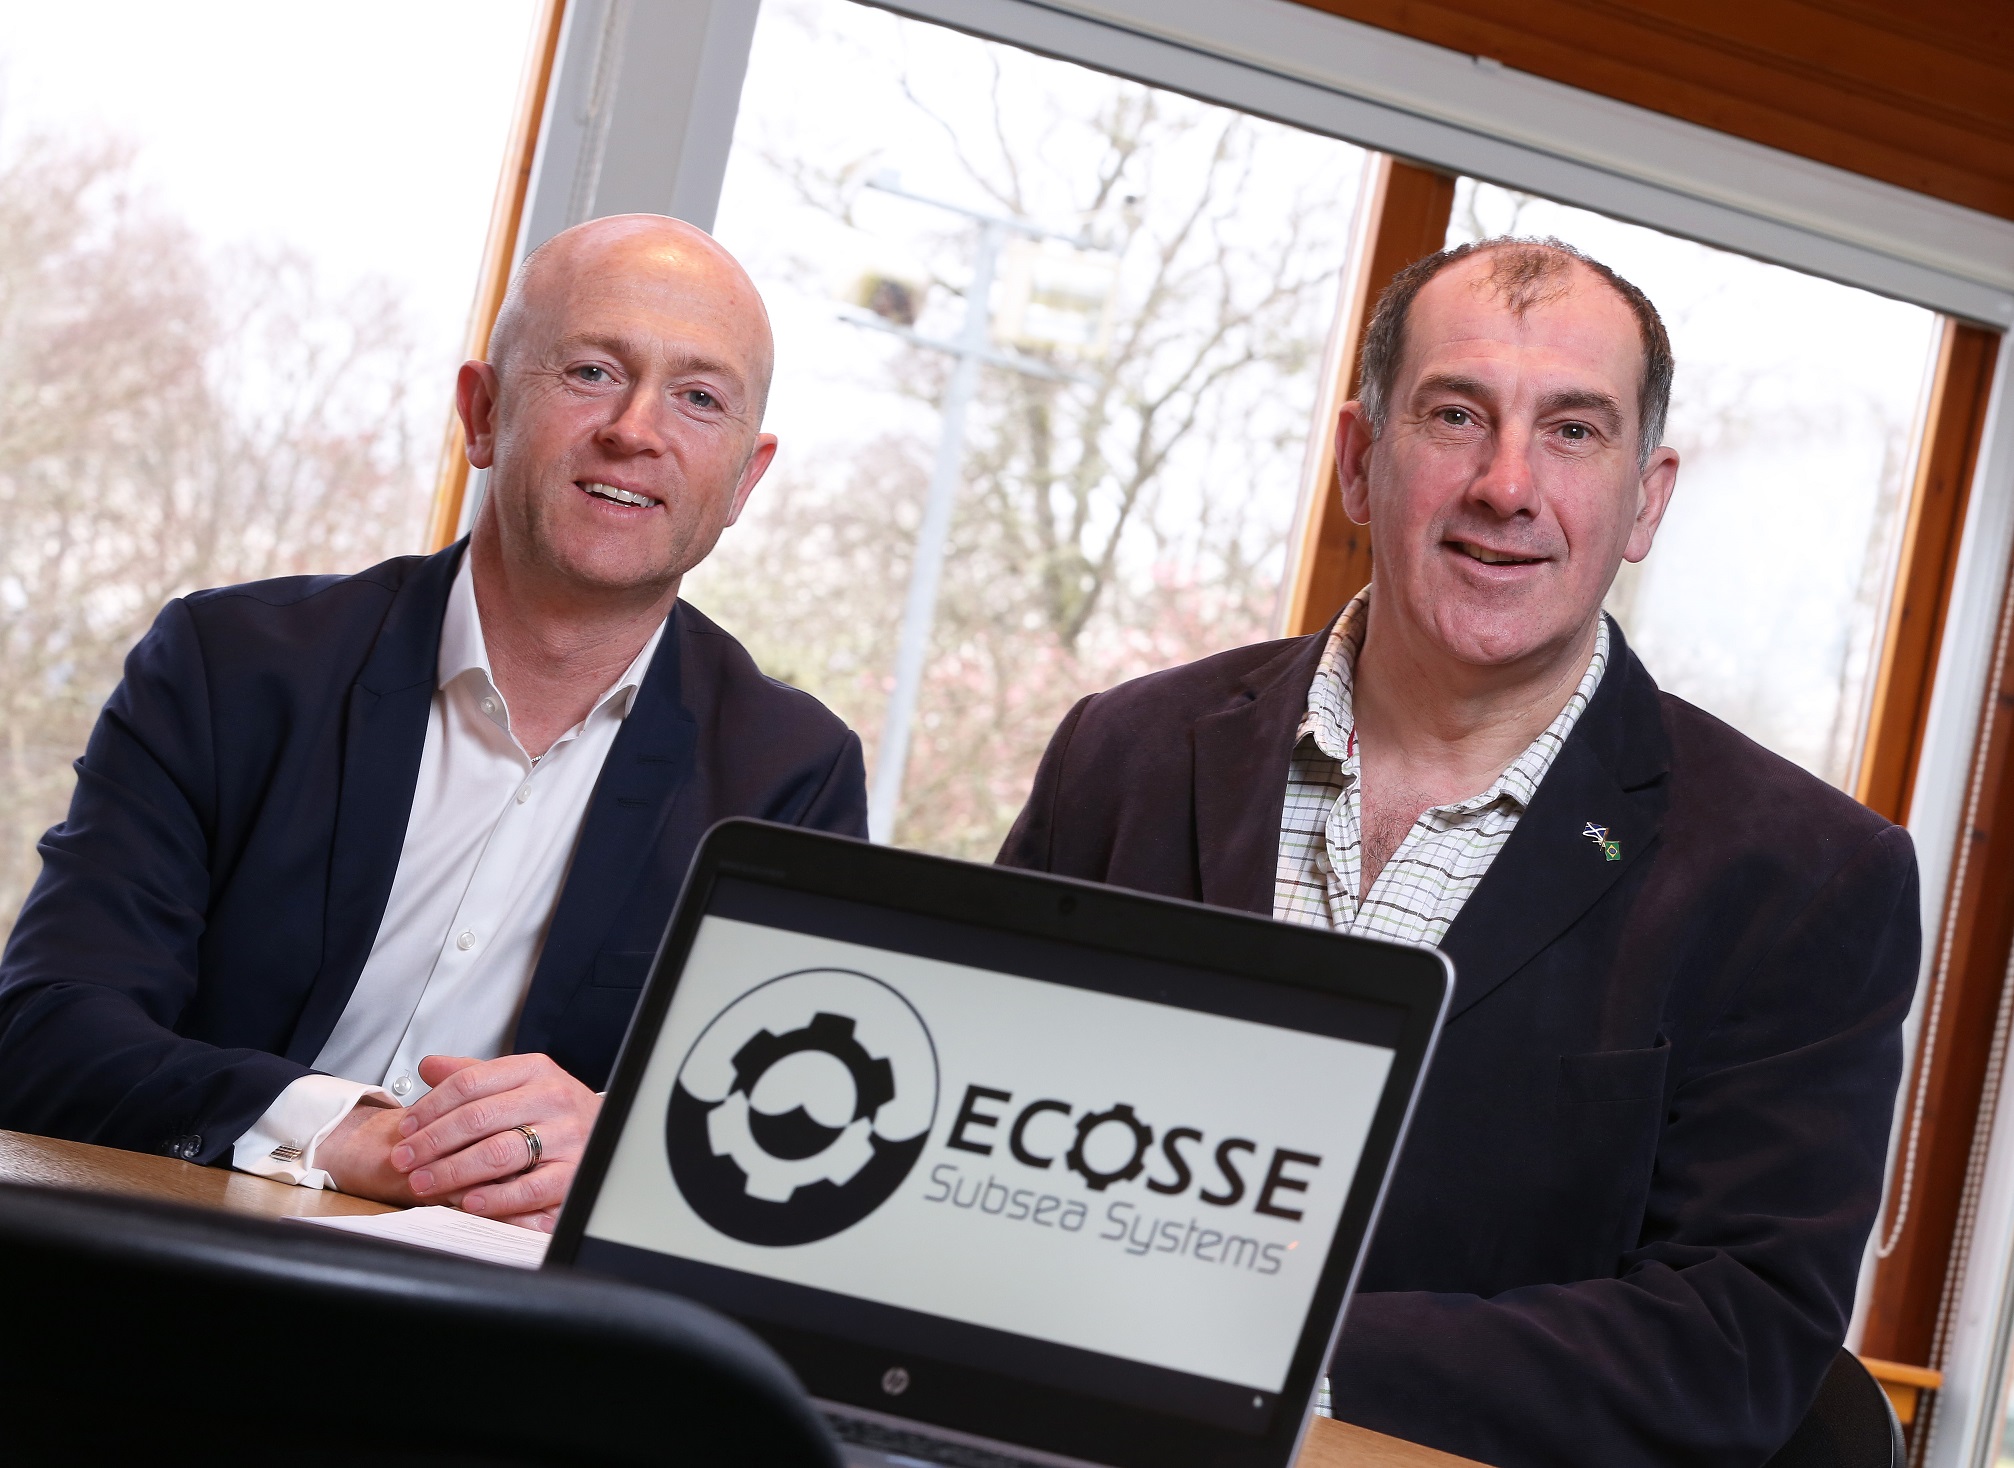 Ecosse Subsea Systems managing director Mark Gillespie left with chairman Mike Wilson 2